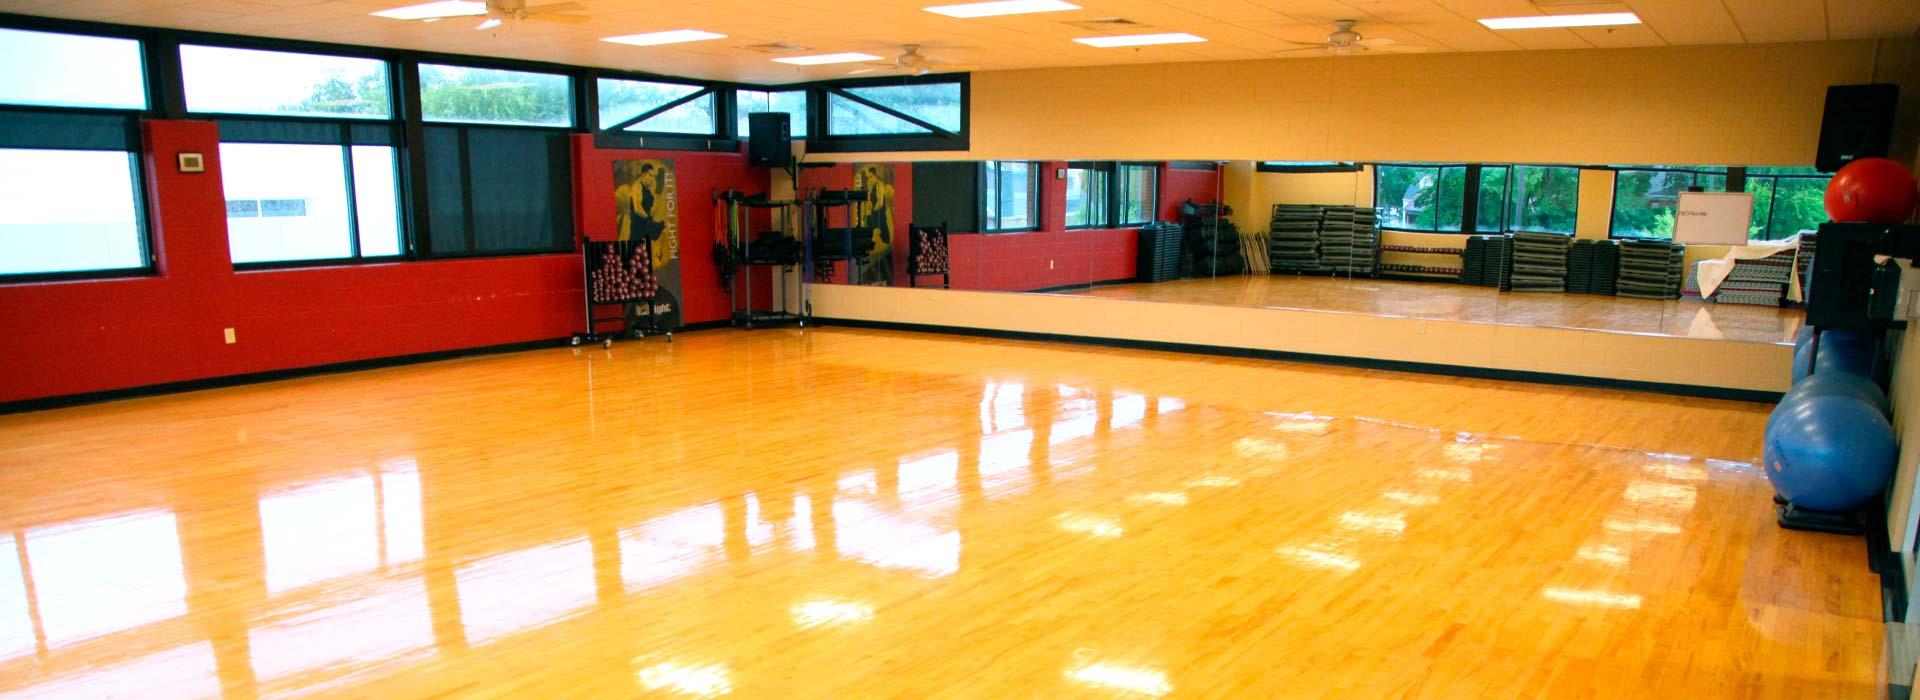 Group Exercise Room at the YMCA on Granby